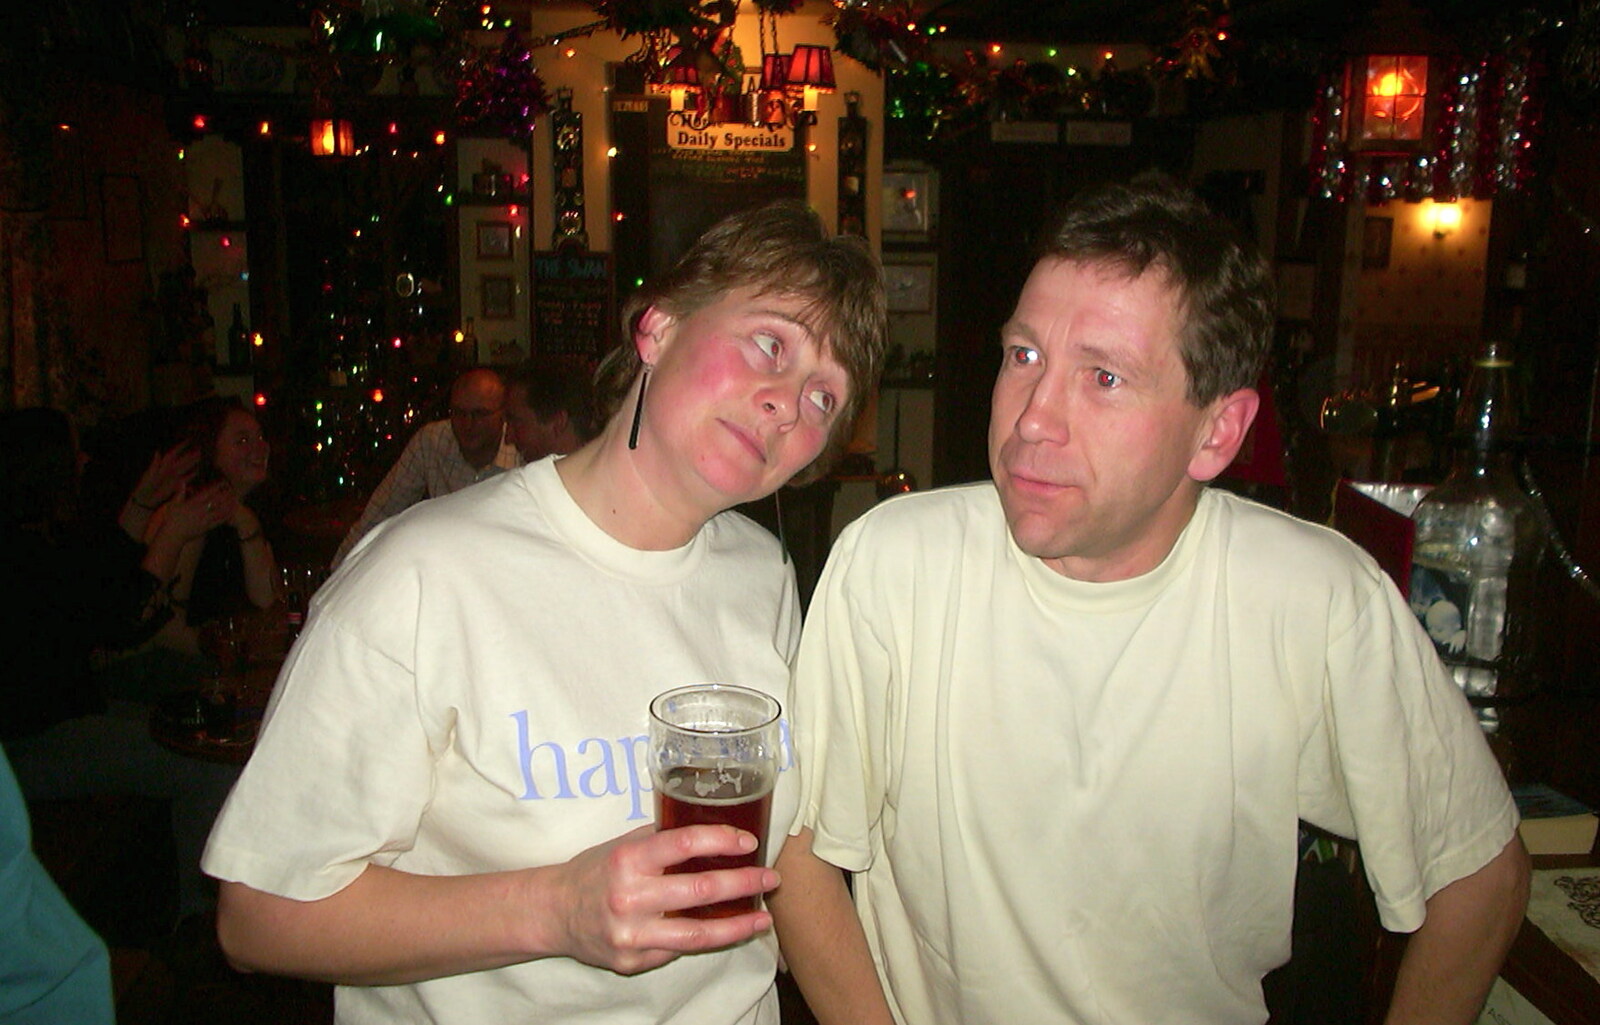 New Year's Eve at the Swan Inn, Brome, Suffolk - 31st December 2002: Pippa and Apple